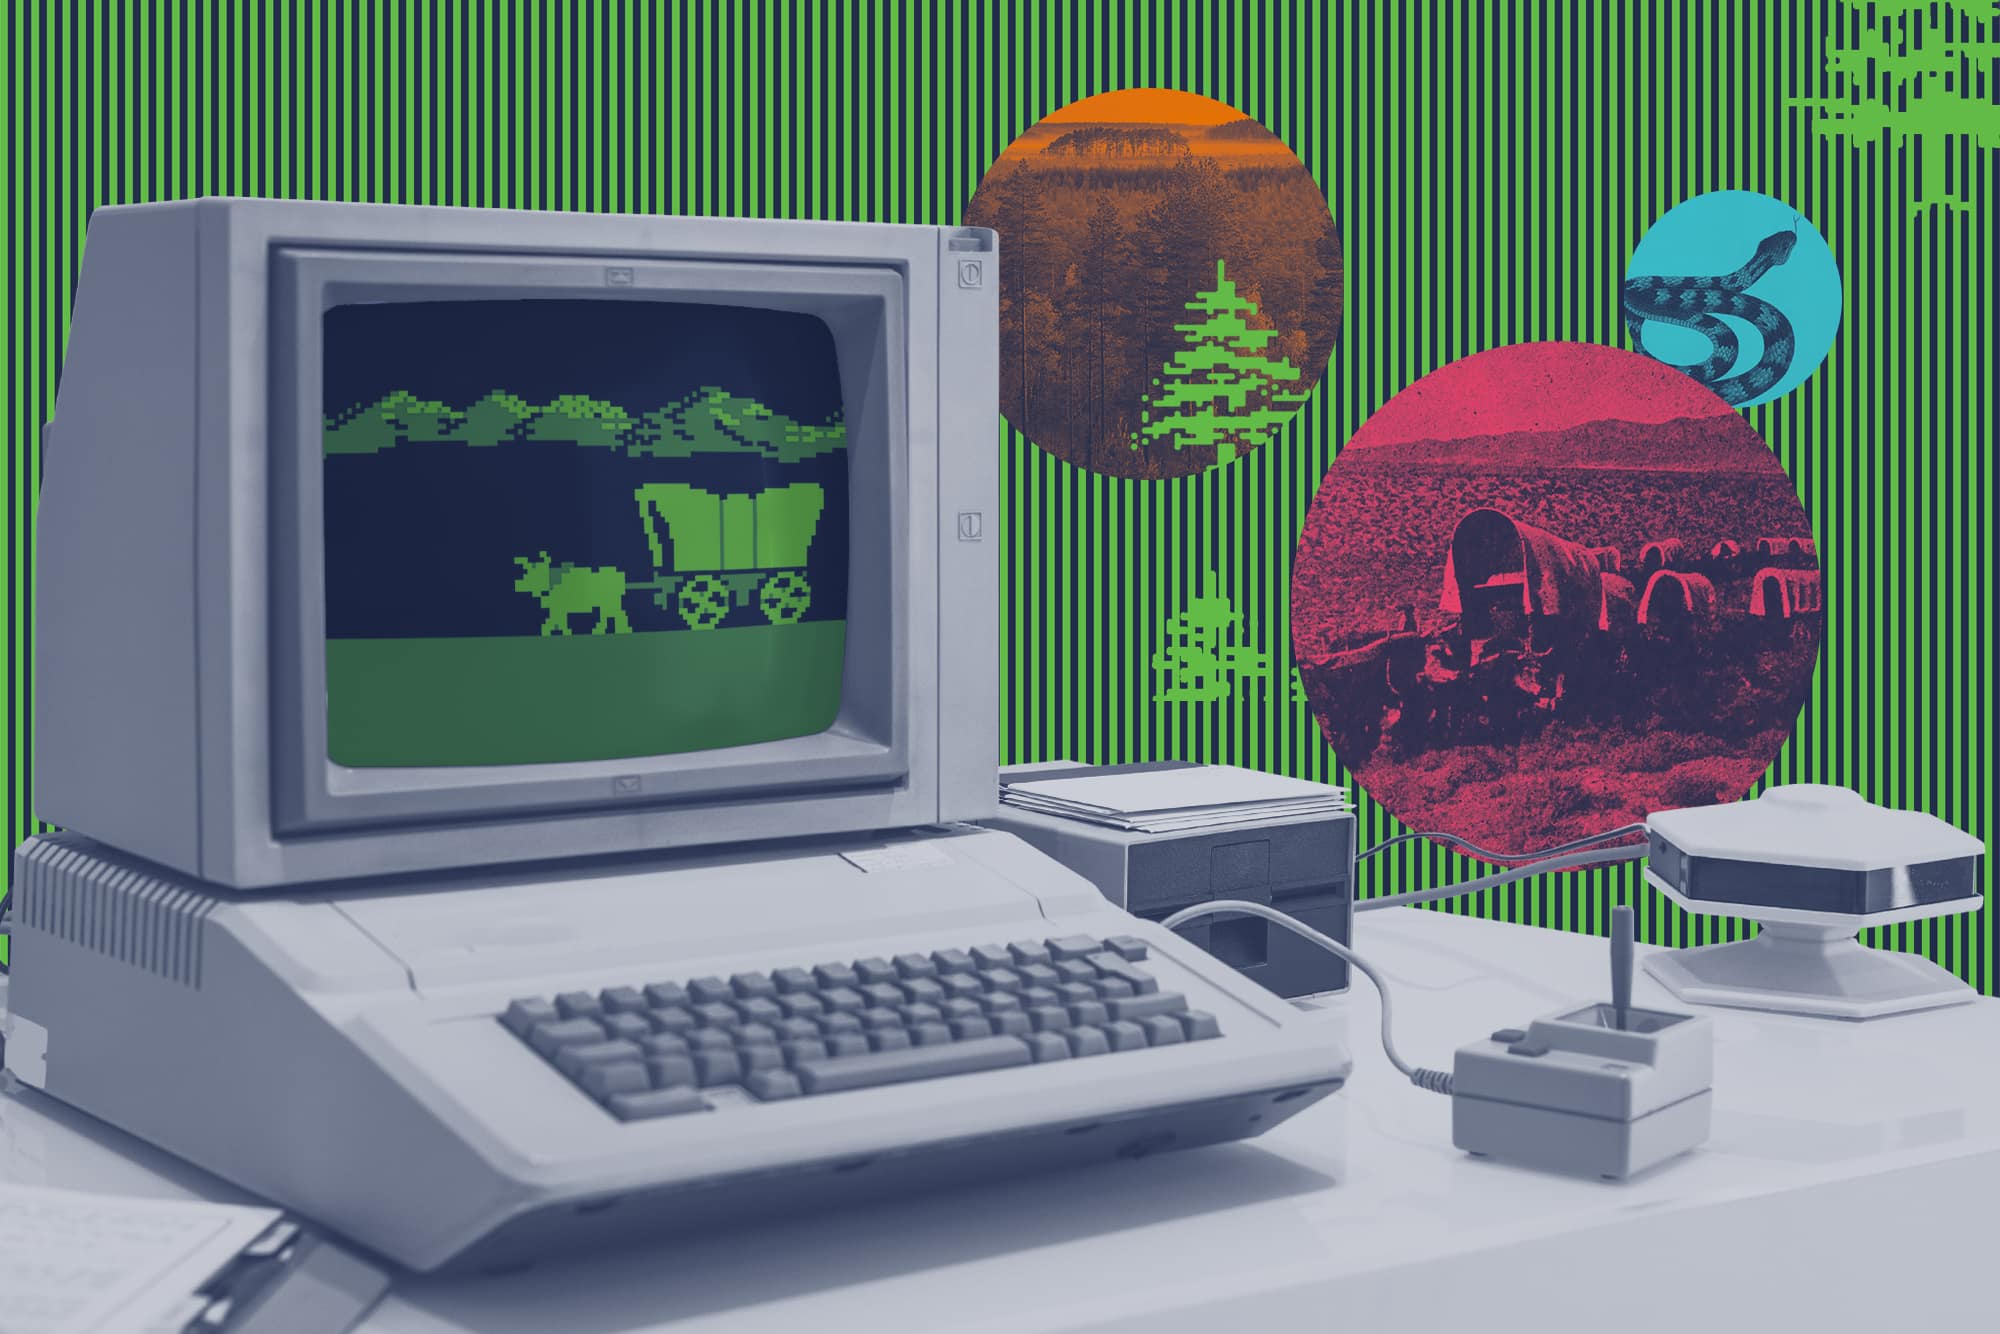 Illustration of 1980s computer monitor with a pixelated ox pulling a wagon